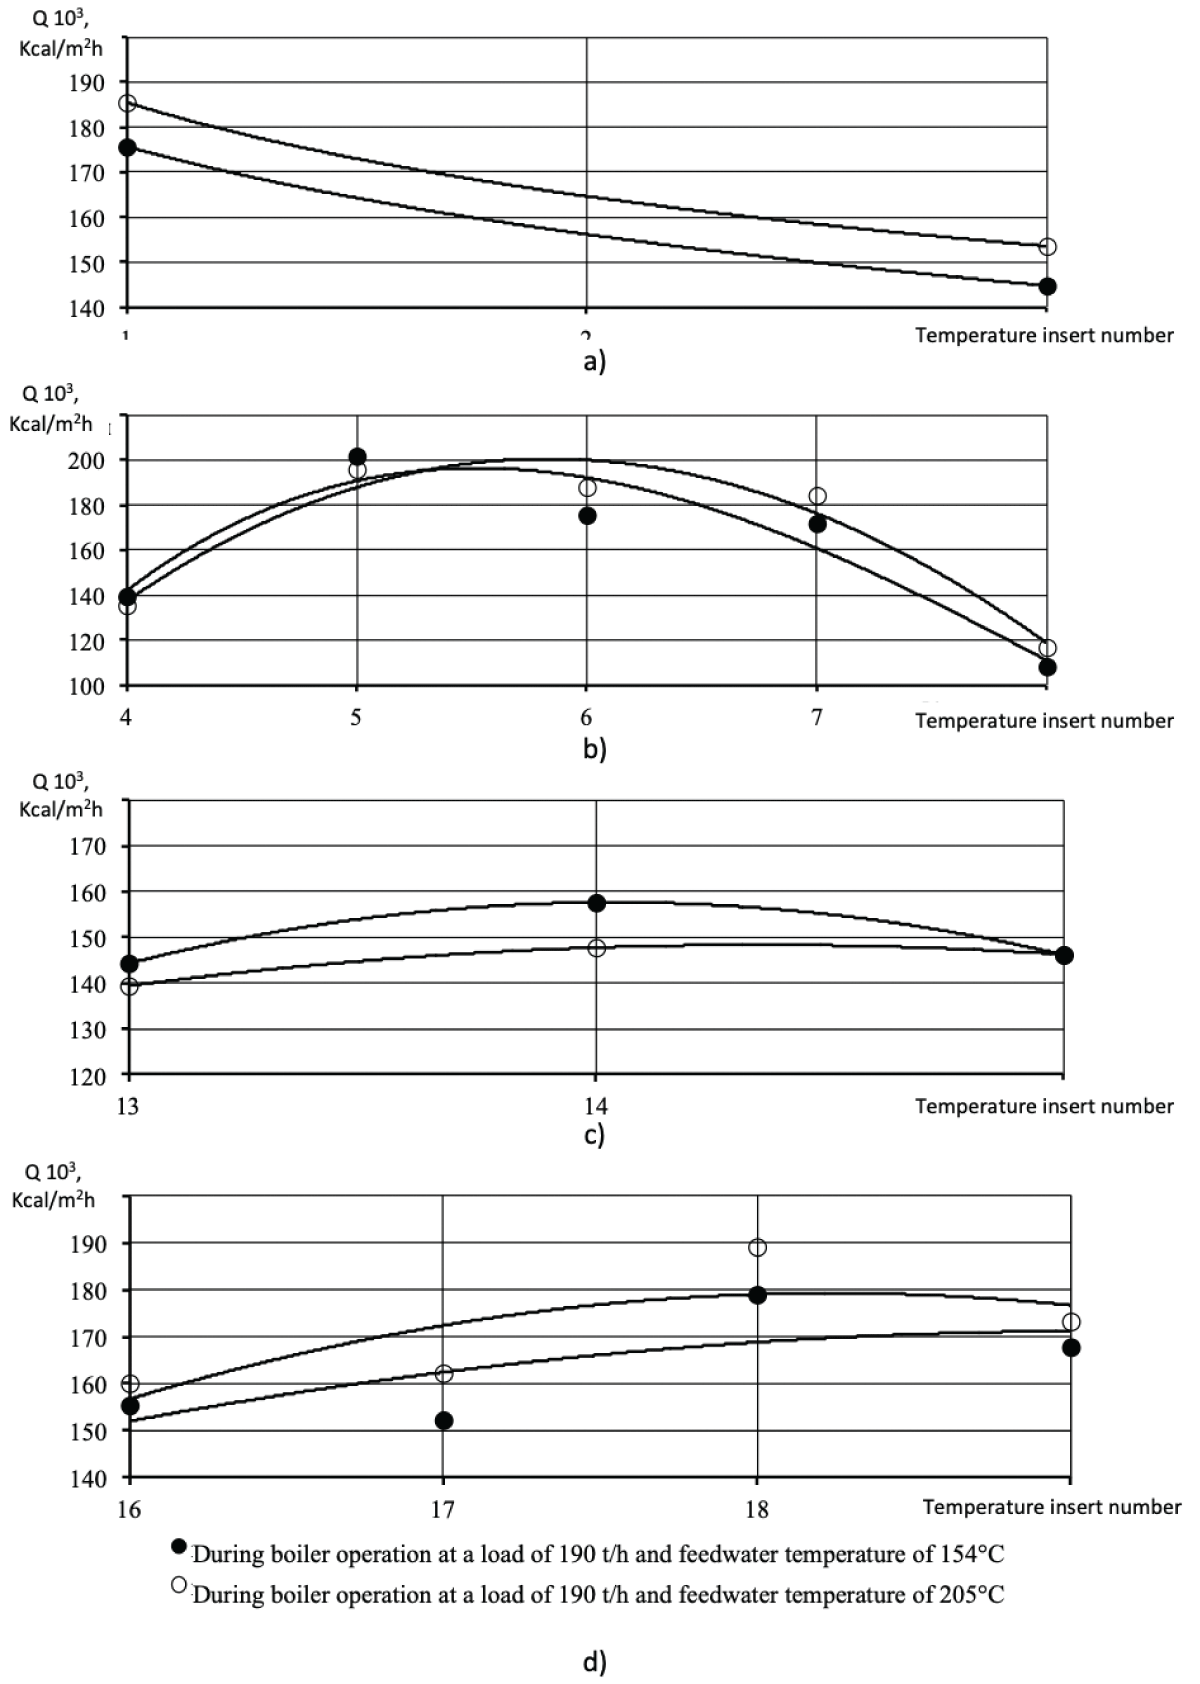 Distribution of heat loads across the width of the furnace at an elevation of 8.0 m. a) Front screen; b) Right side screen; c) Rear screen; d) Left side screen.